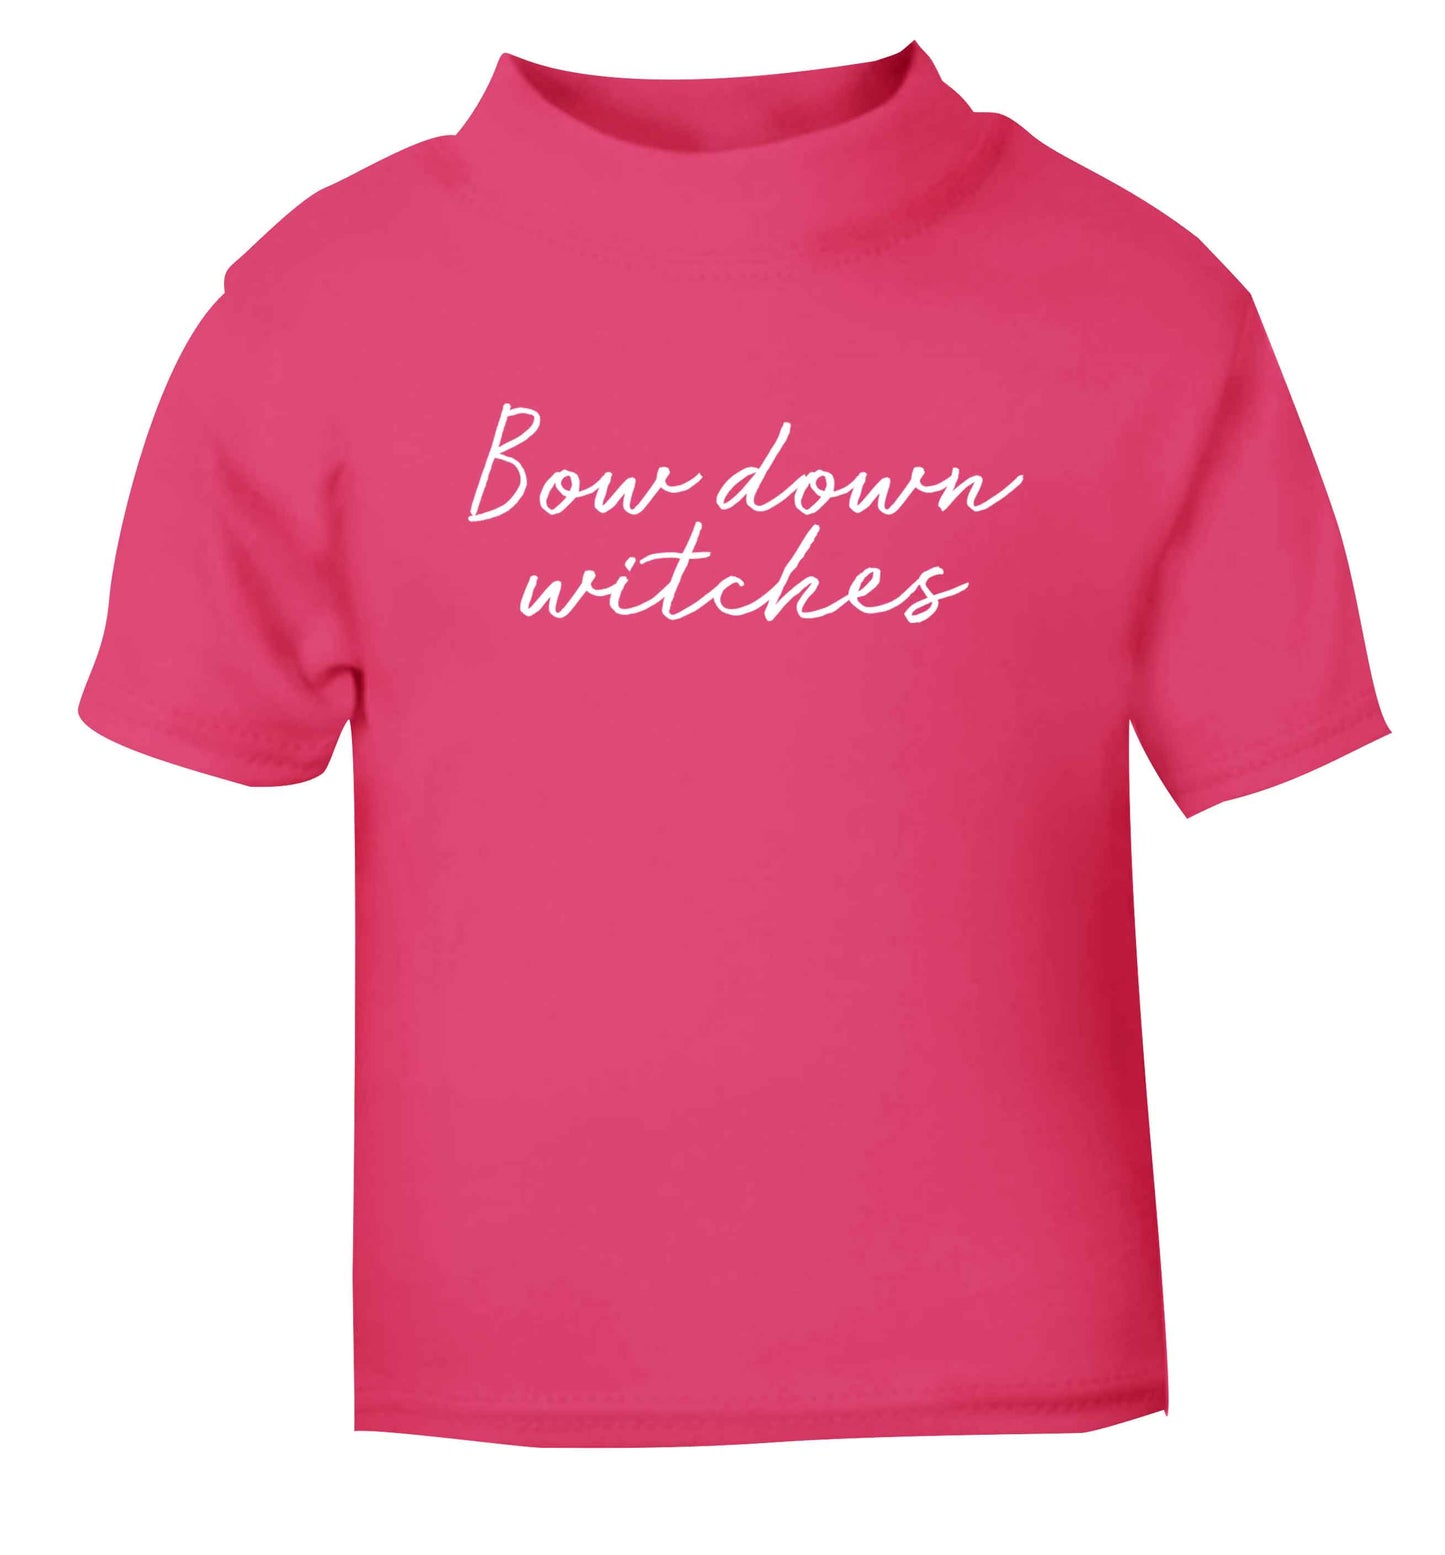 Bow down witches pink baby toddler Tshirt 2 Years